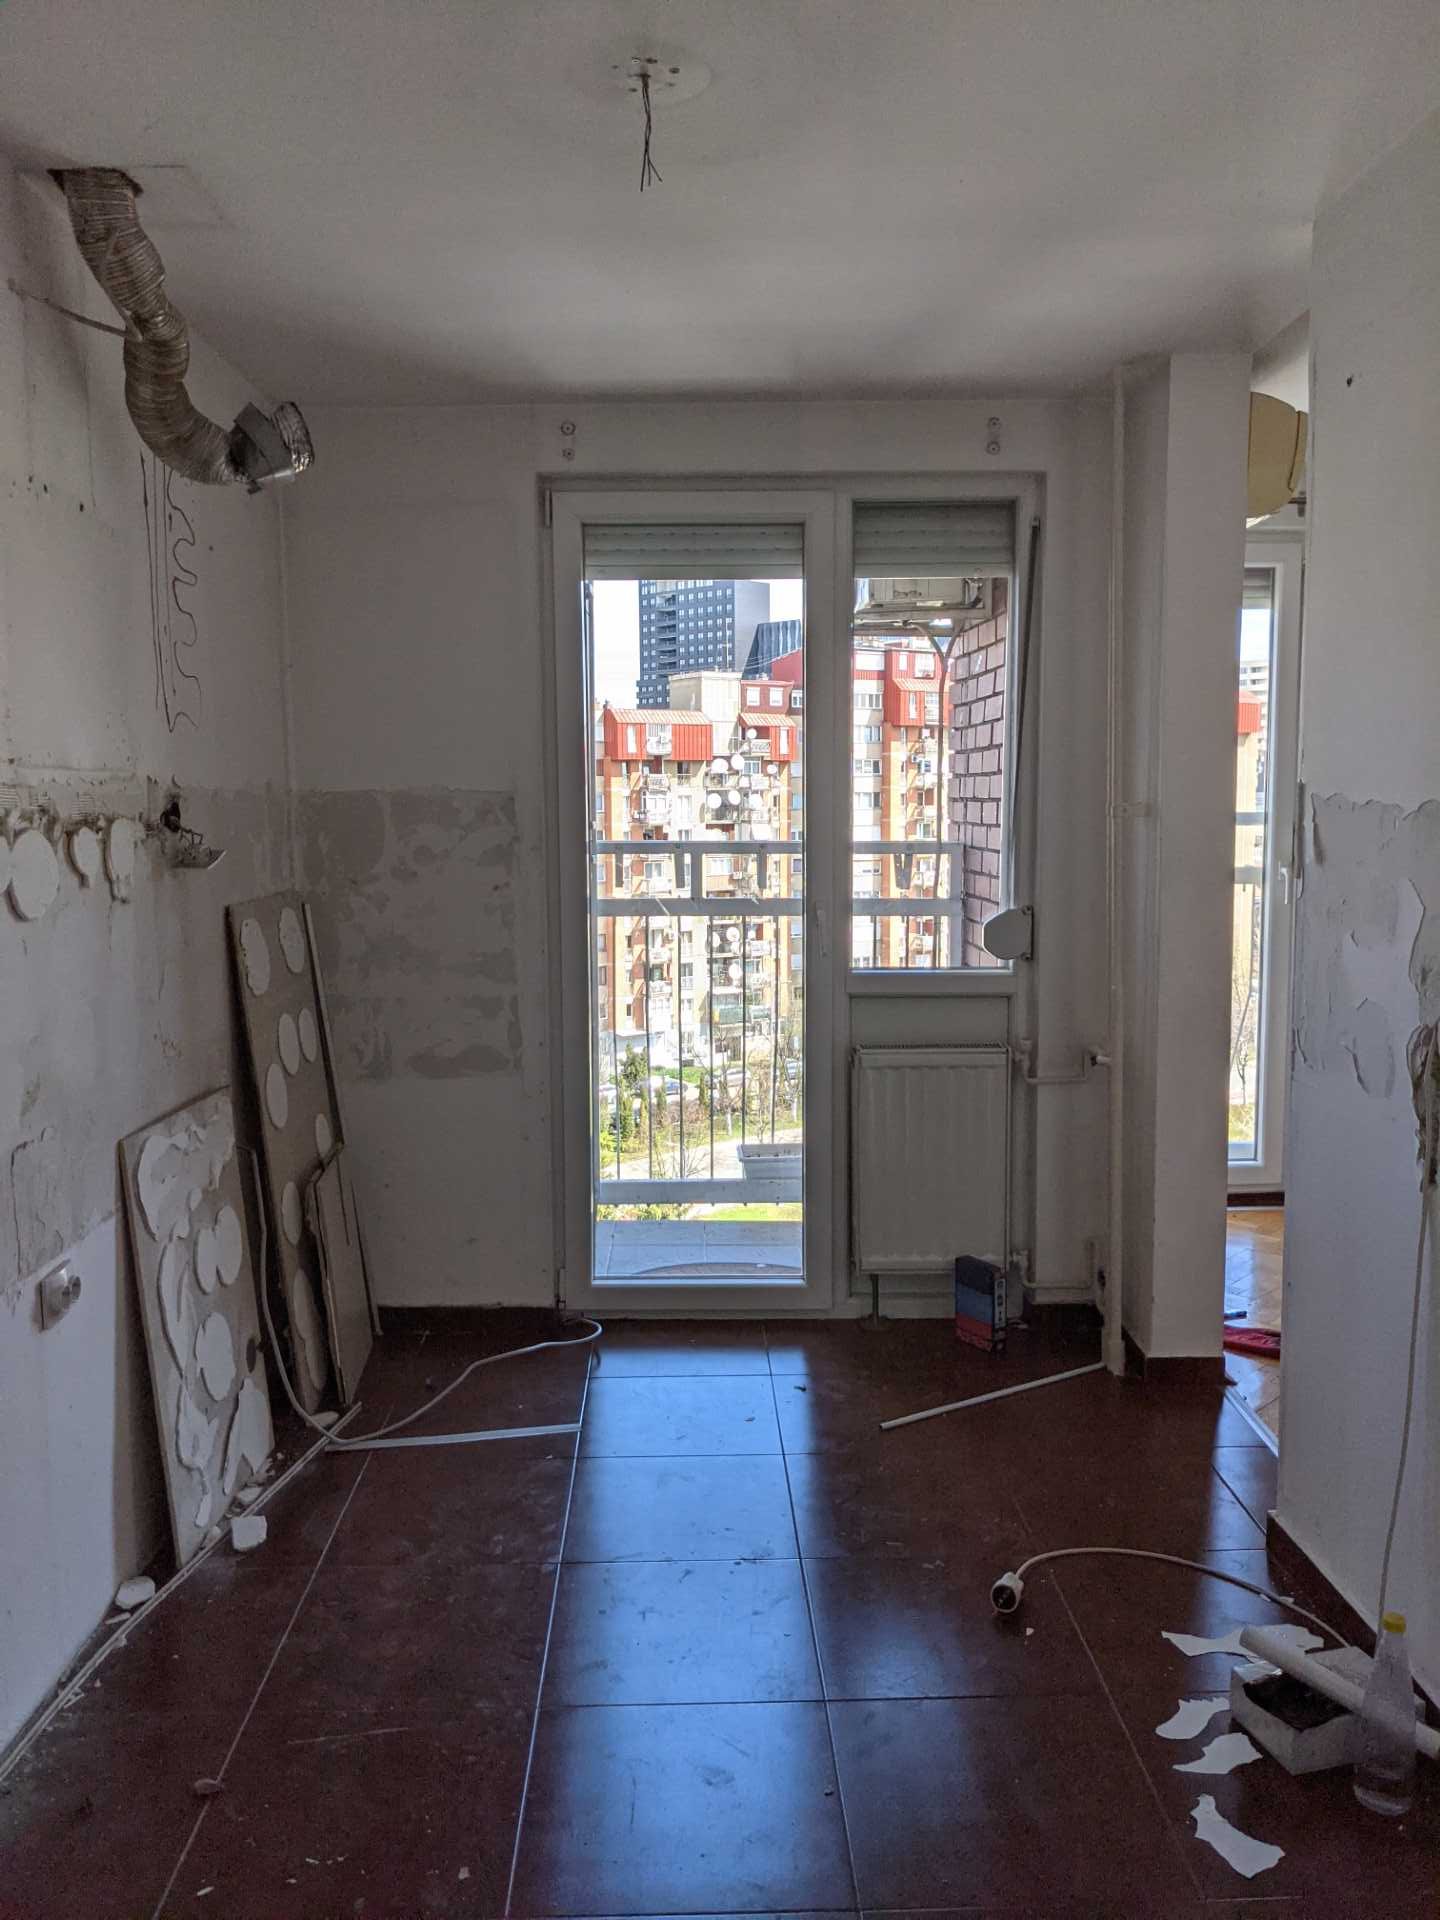 BEFORE - An apartment was completely gutted before being transformed into an apartment full of color.